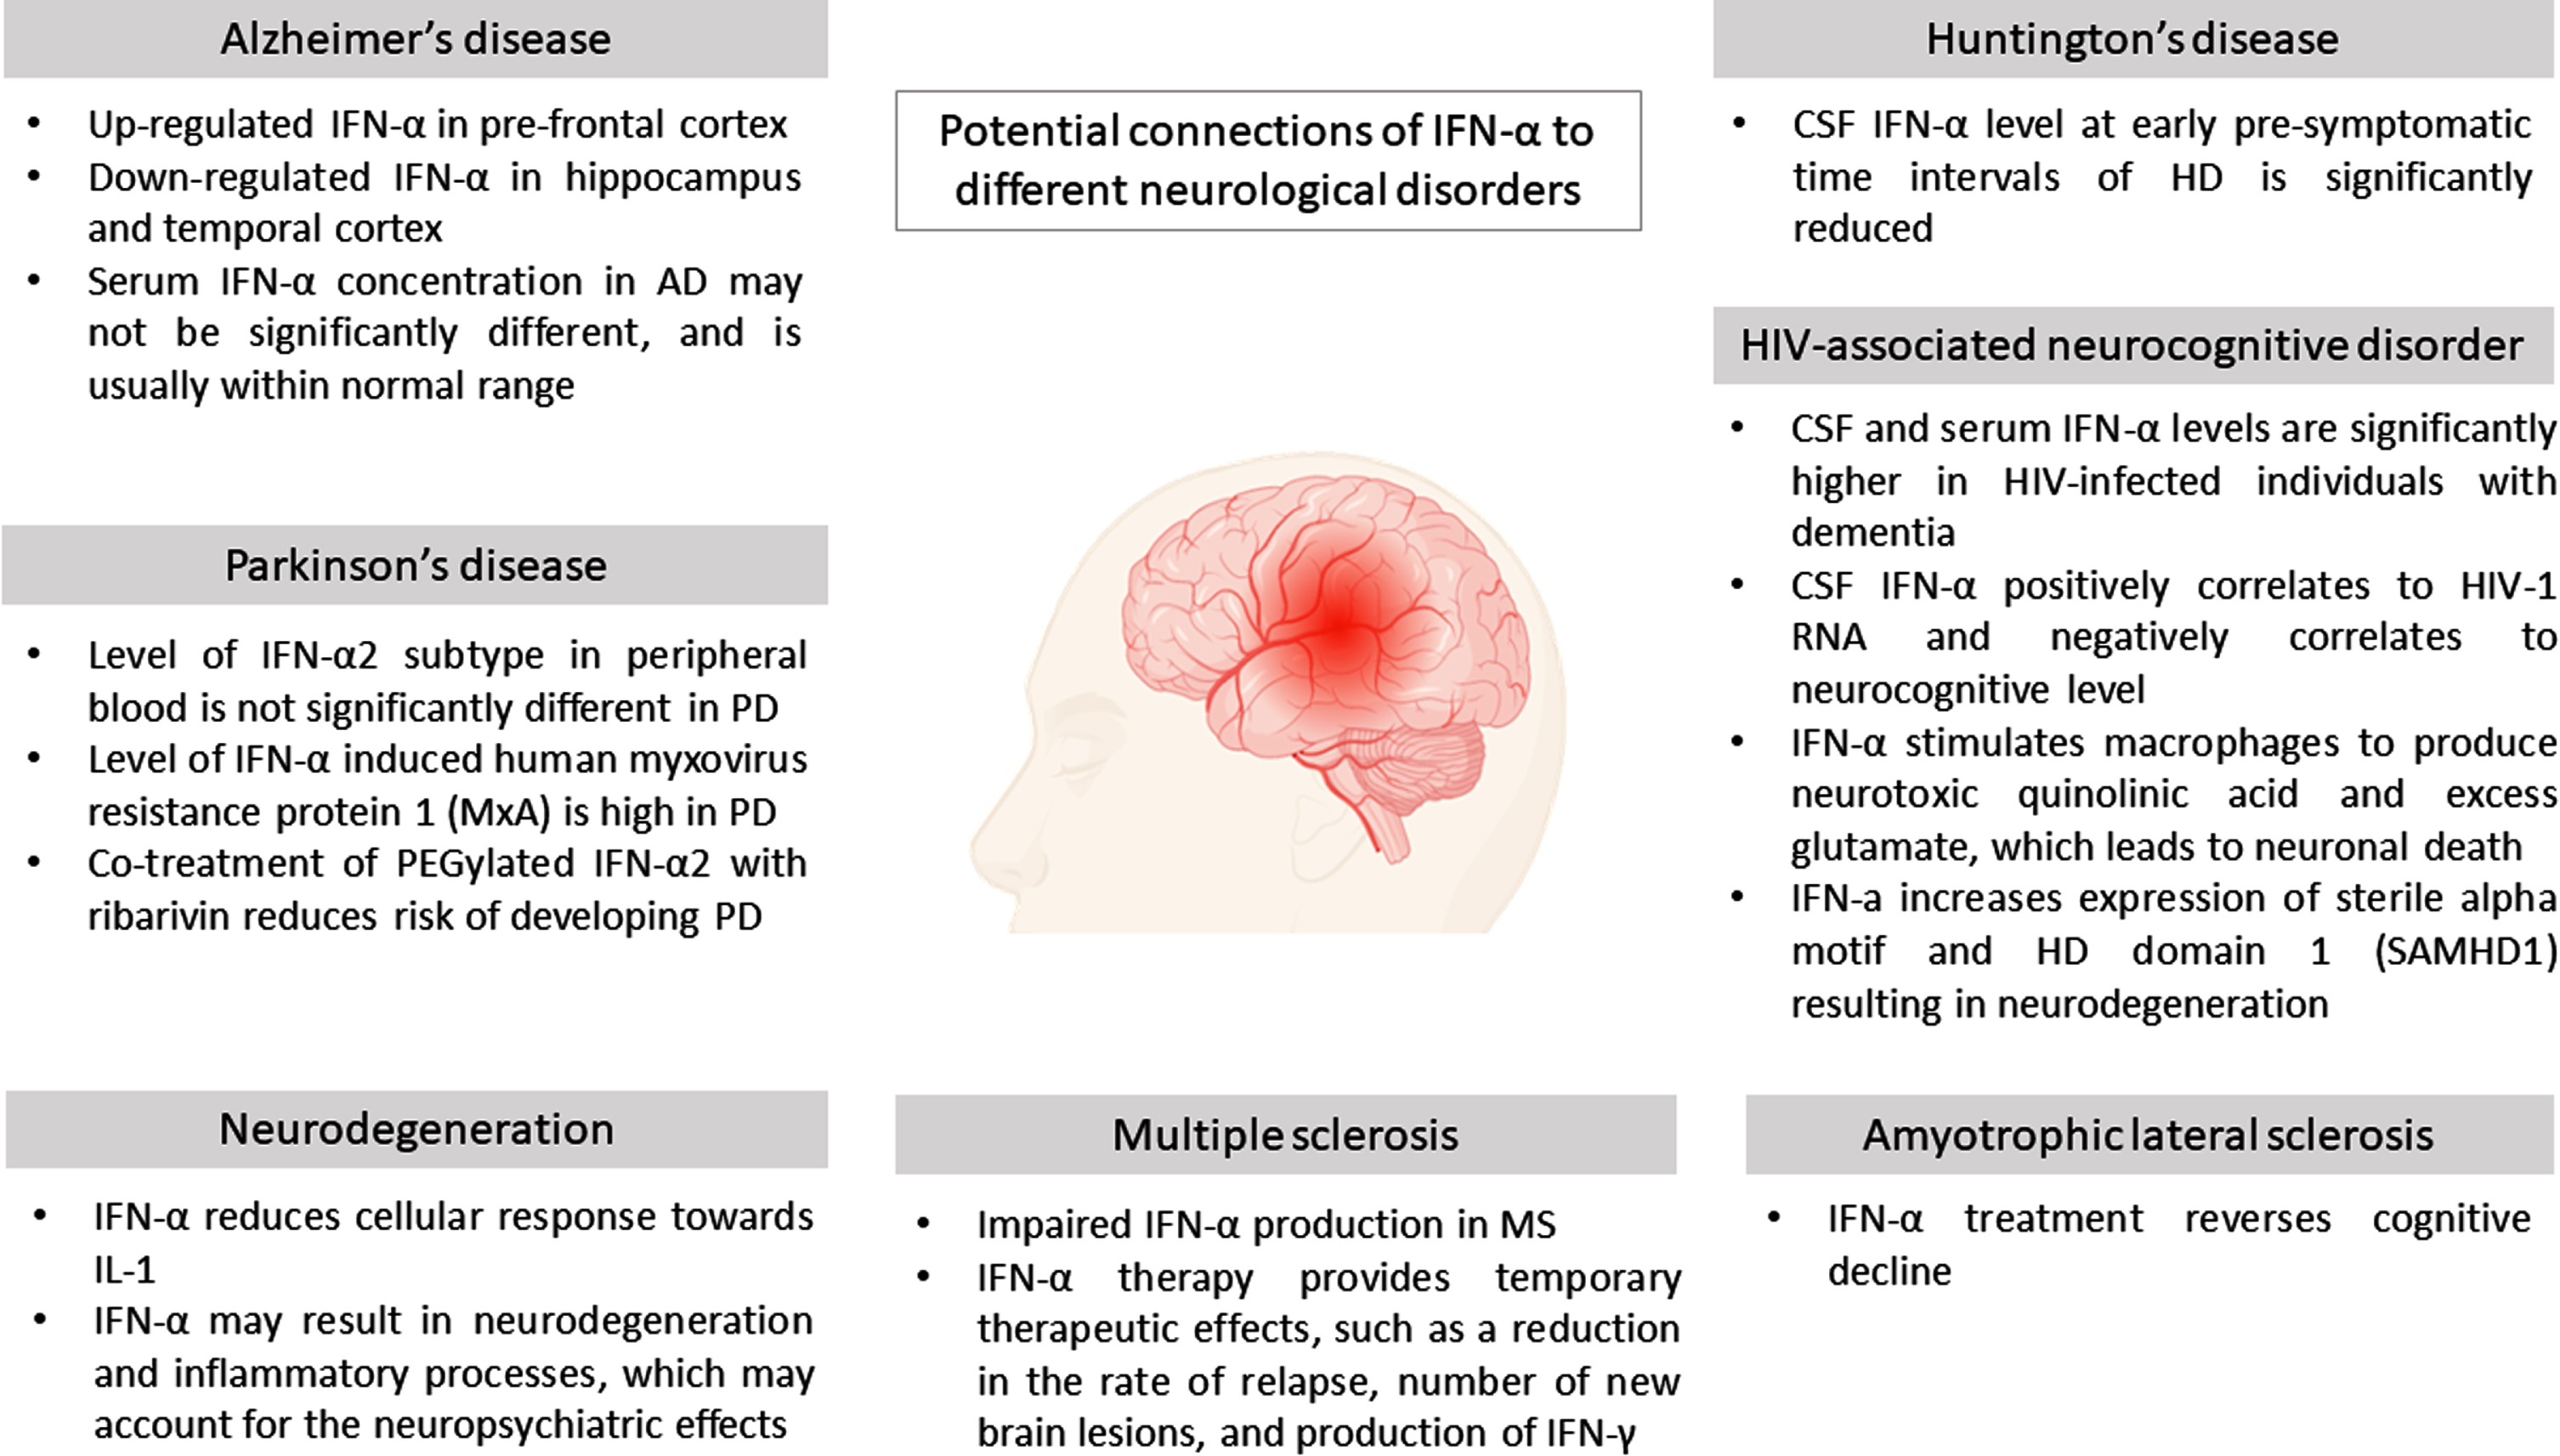 Potential connections of IFN-α to different neurological disorders.